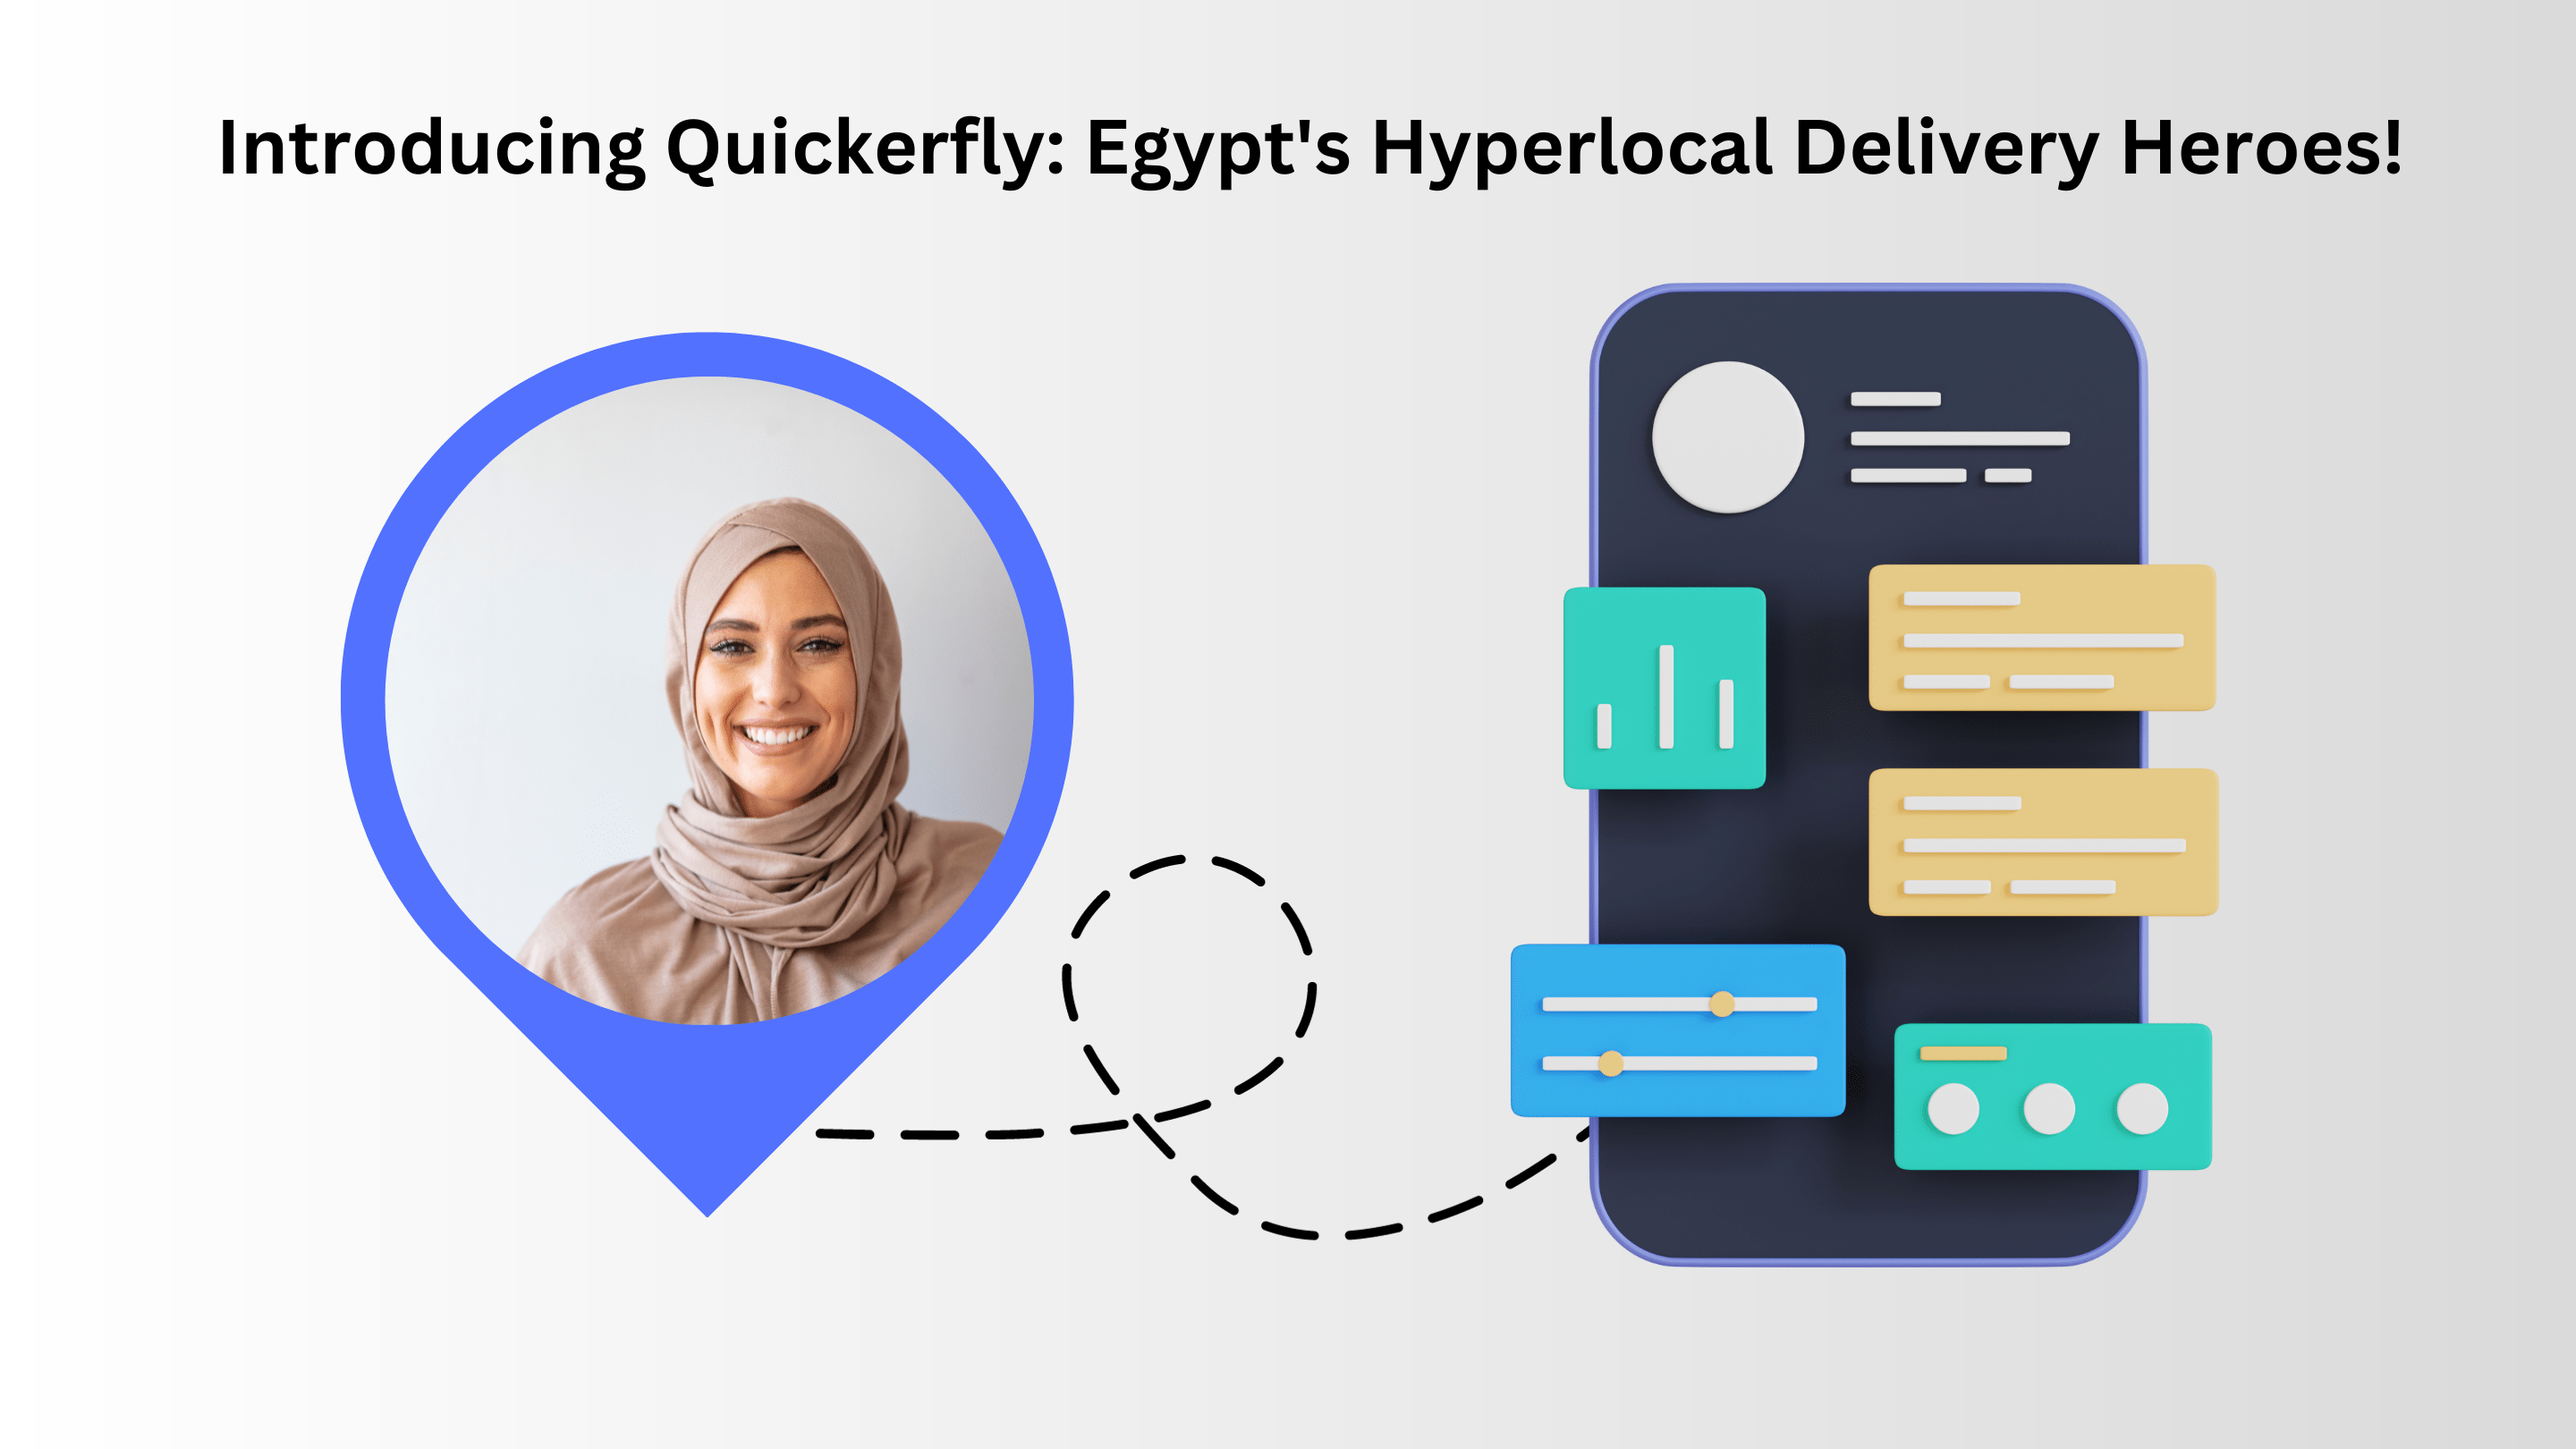 an image about how Quickerfly is Egypt's Hyperlocal Delivery Heroes